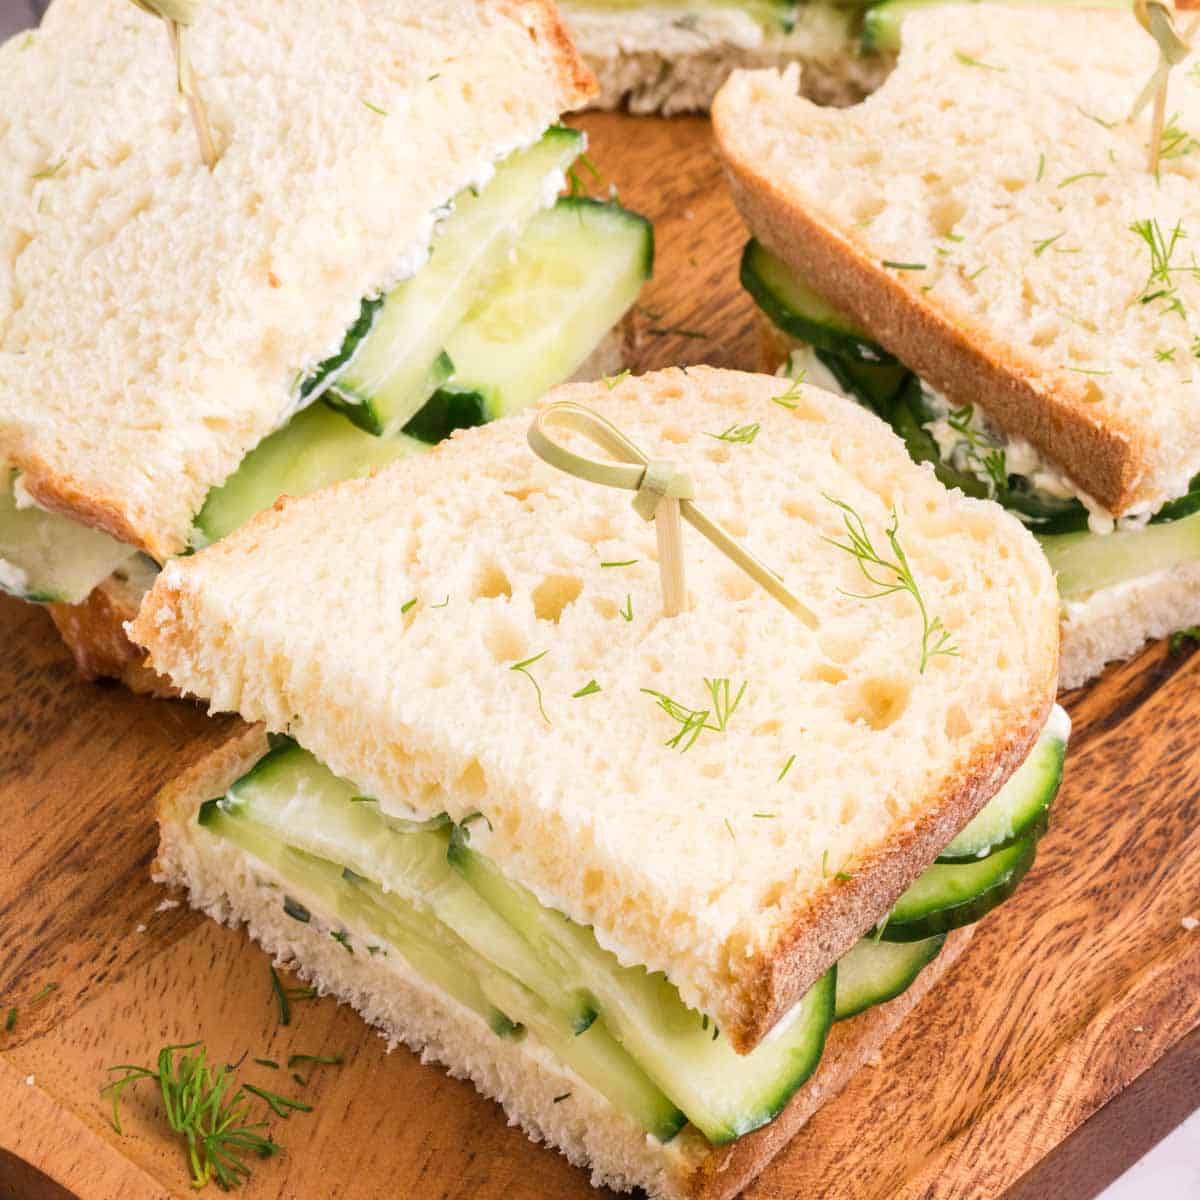 Sliced cucumber sandwiches on a wooden tray with dill sprinkled on top.